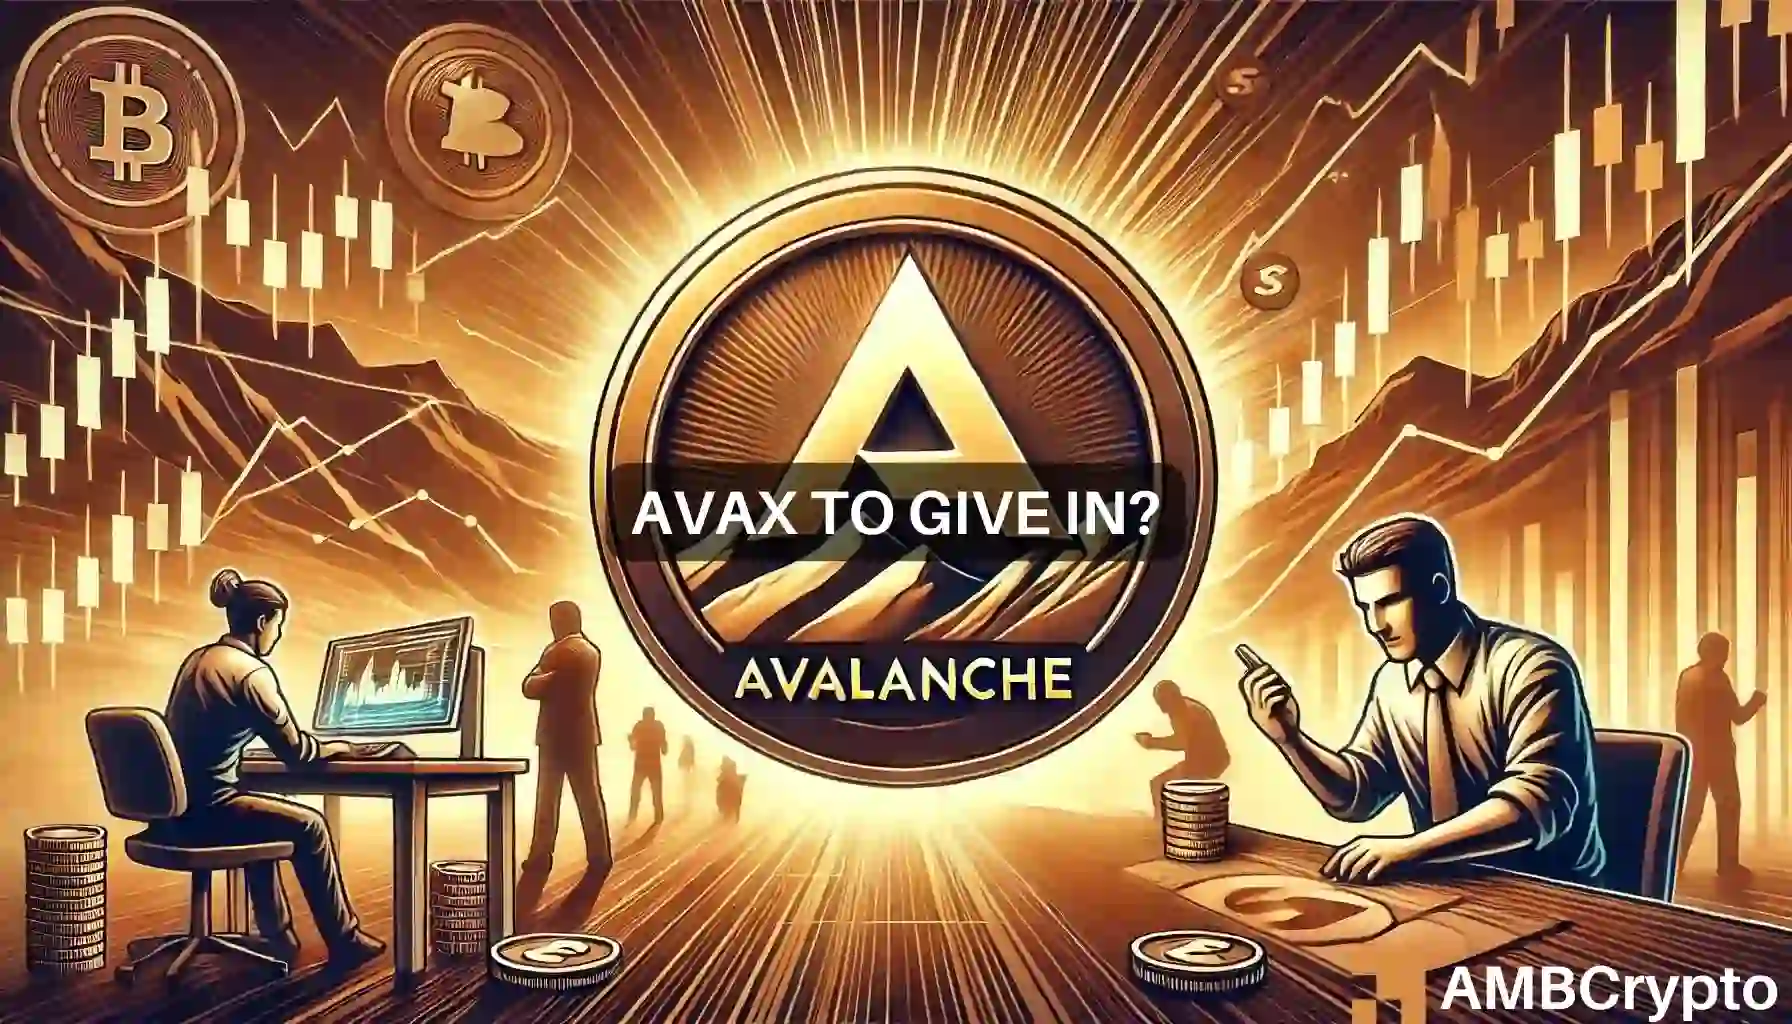 AVAX traders bet on price drop despite positive market indicators – Why?